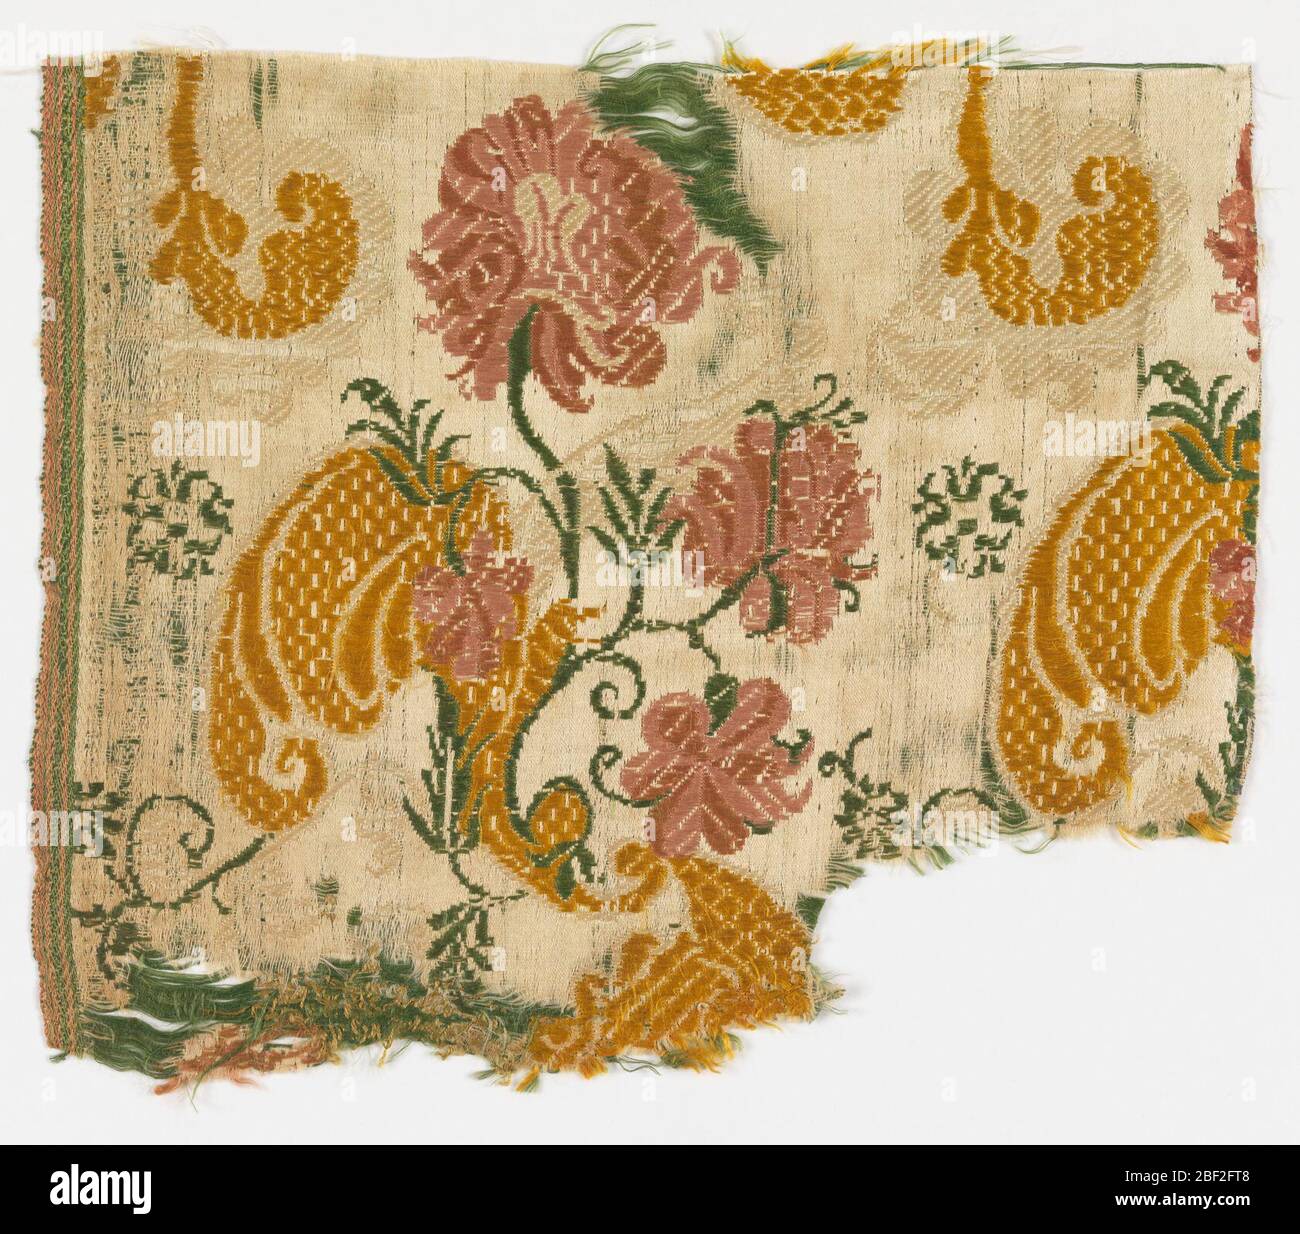 Fragment. White satin ground with design of floral sprays repeated in horizontal rows. Green and white continuous supplementary wefts form part of the design, with yellow and rose brocading. Stock Photo